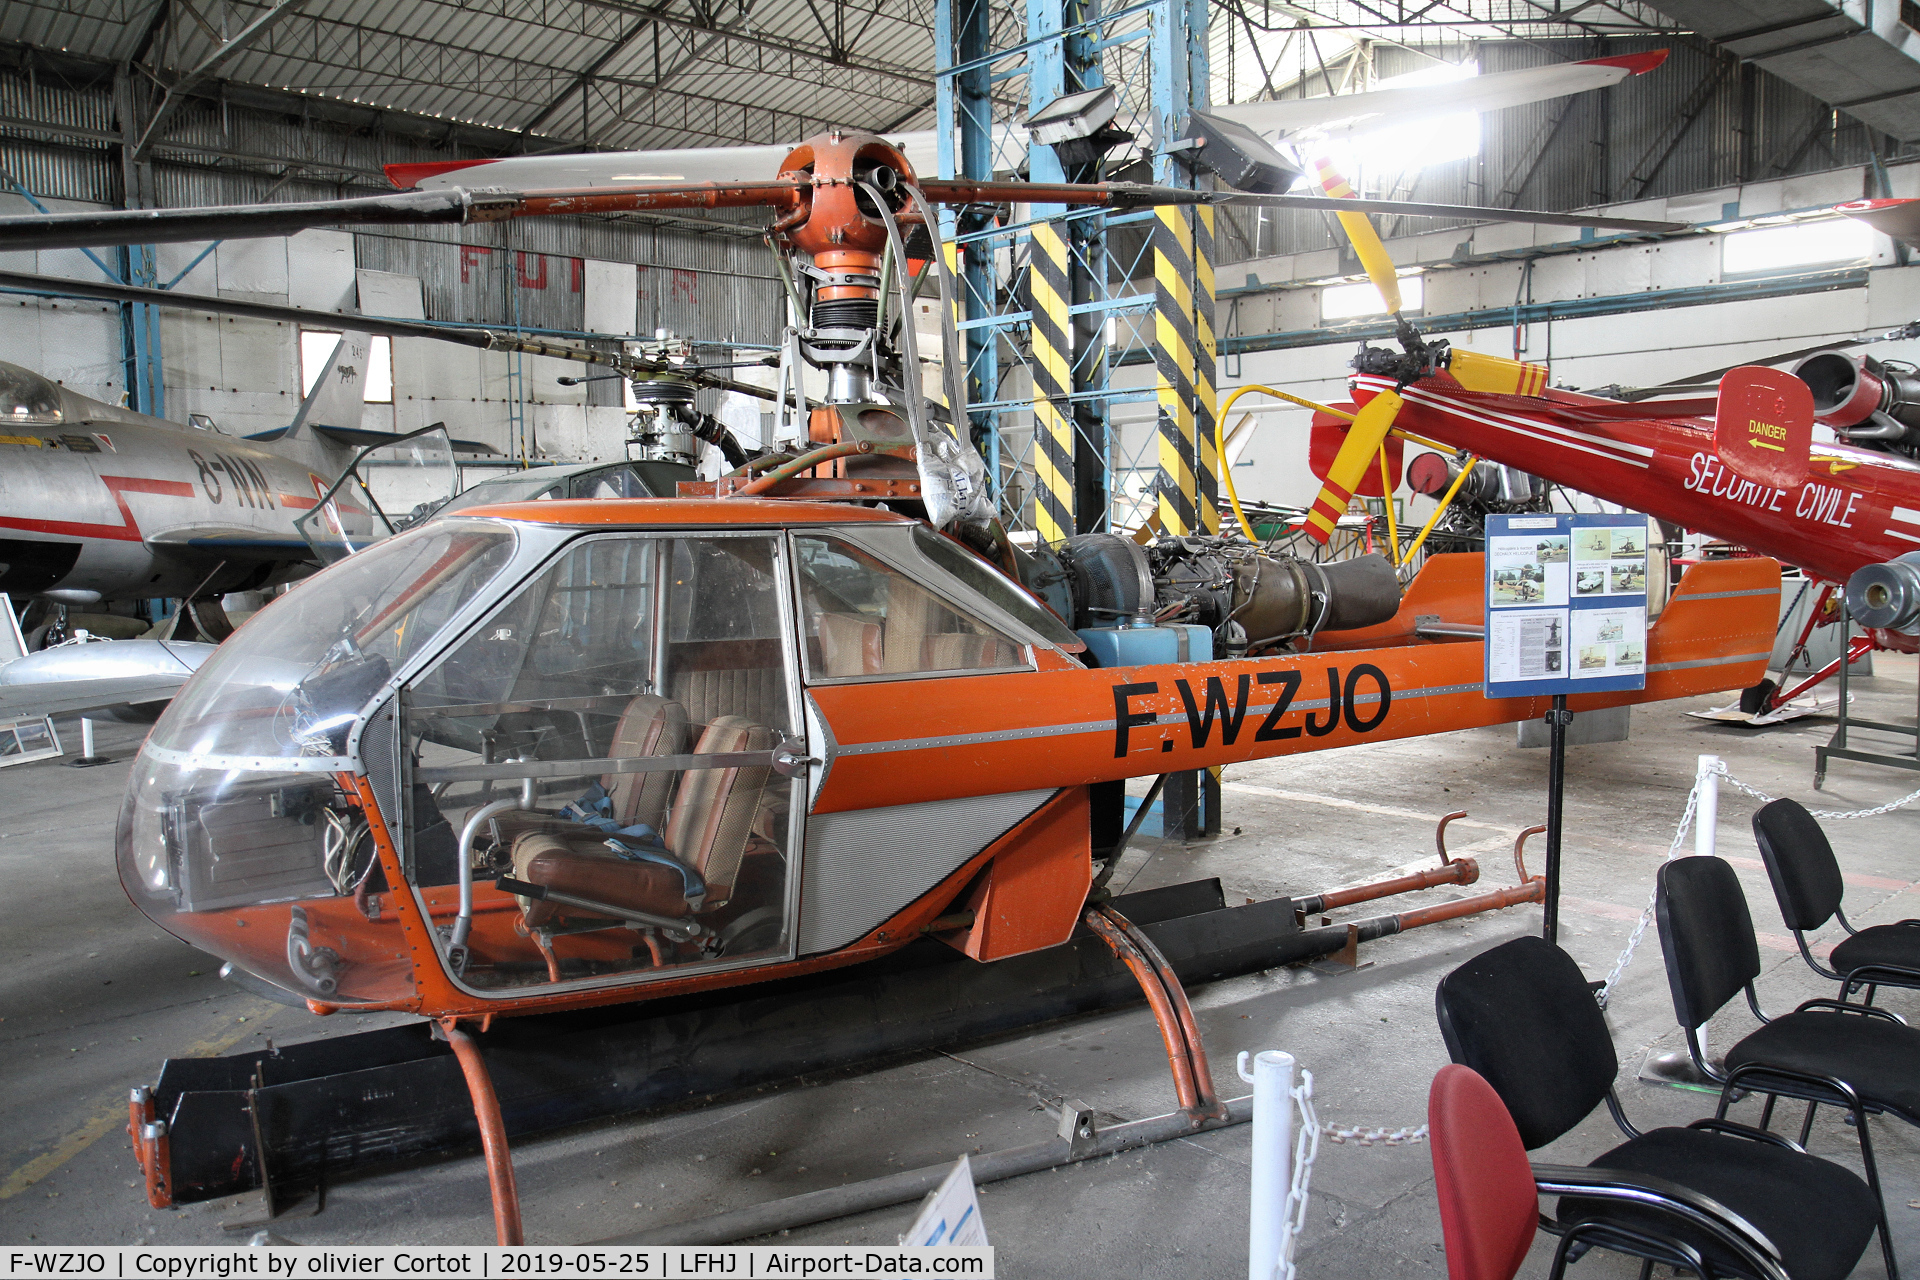 F-WZJO, 1984 Dechaux Helicop-jet C/N 02, this prototype can be found at the Clement Ader Corbas museum